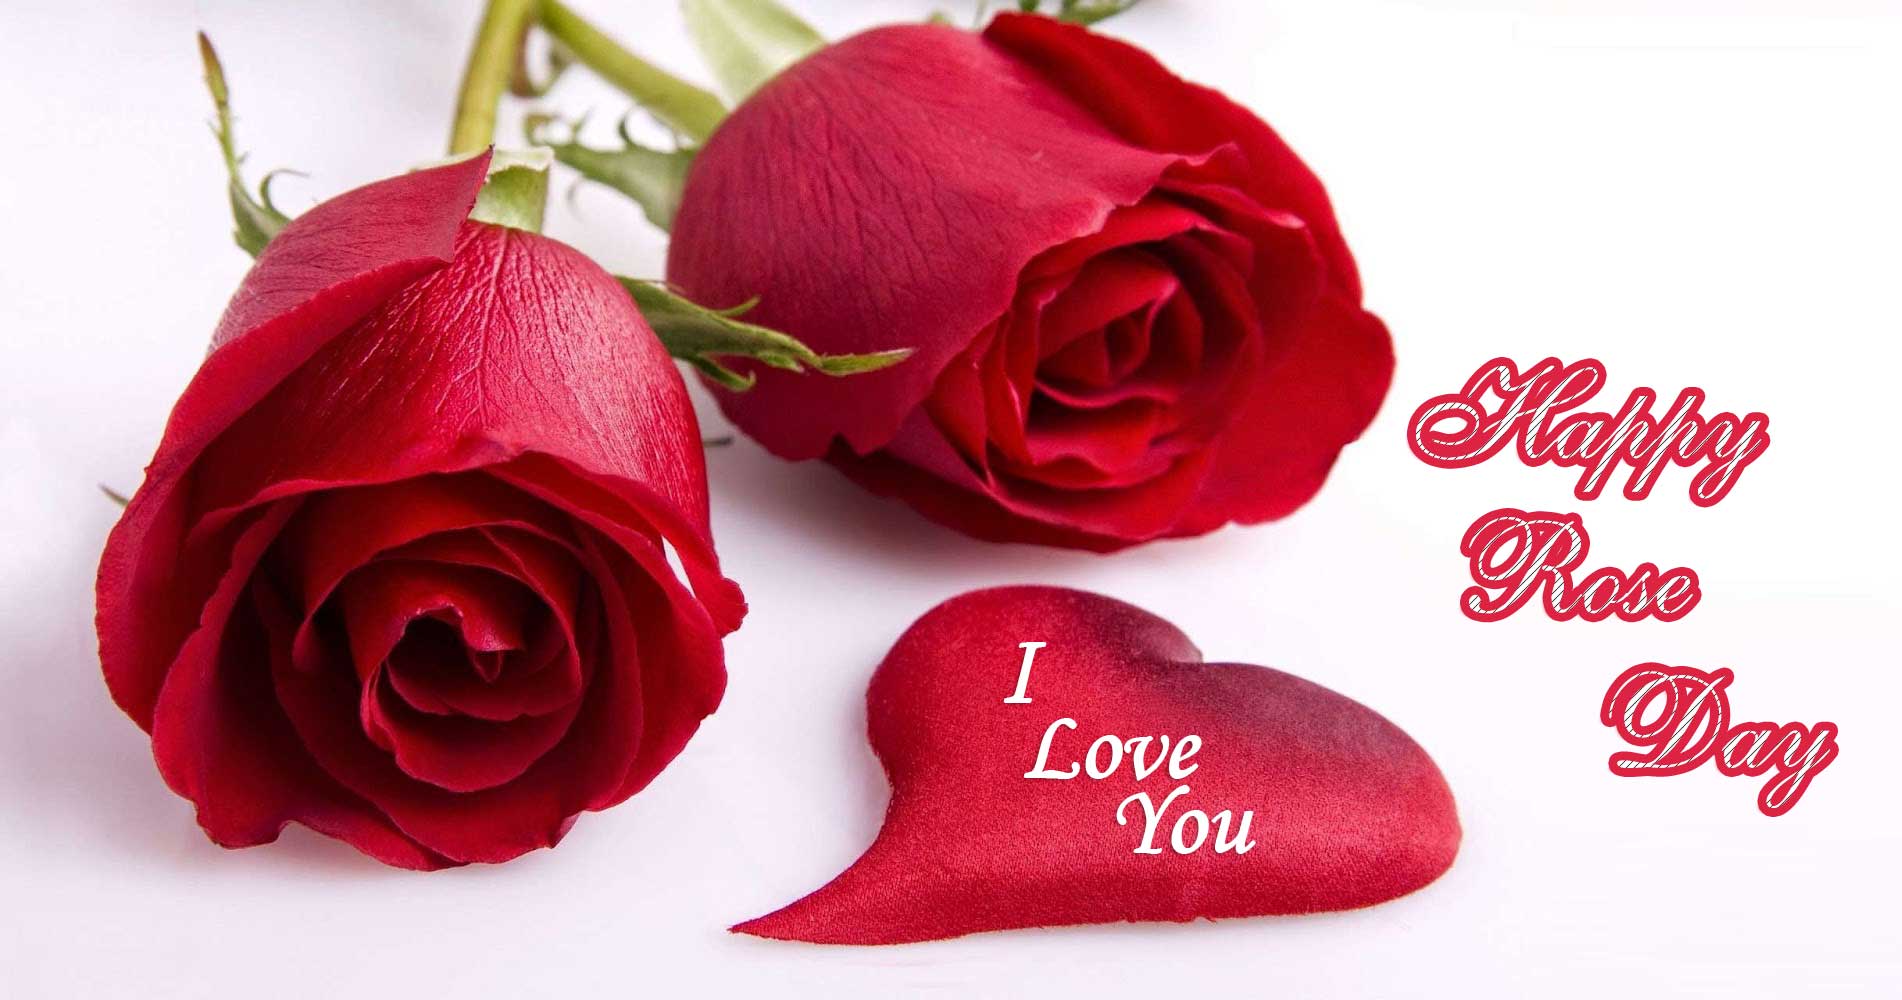 Happy Rose Day Images, Pictures, Pic & Wallpapers Download 2023 HD